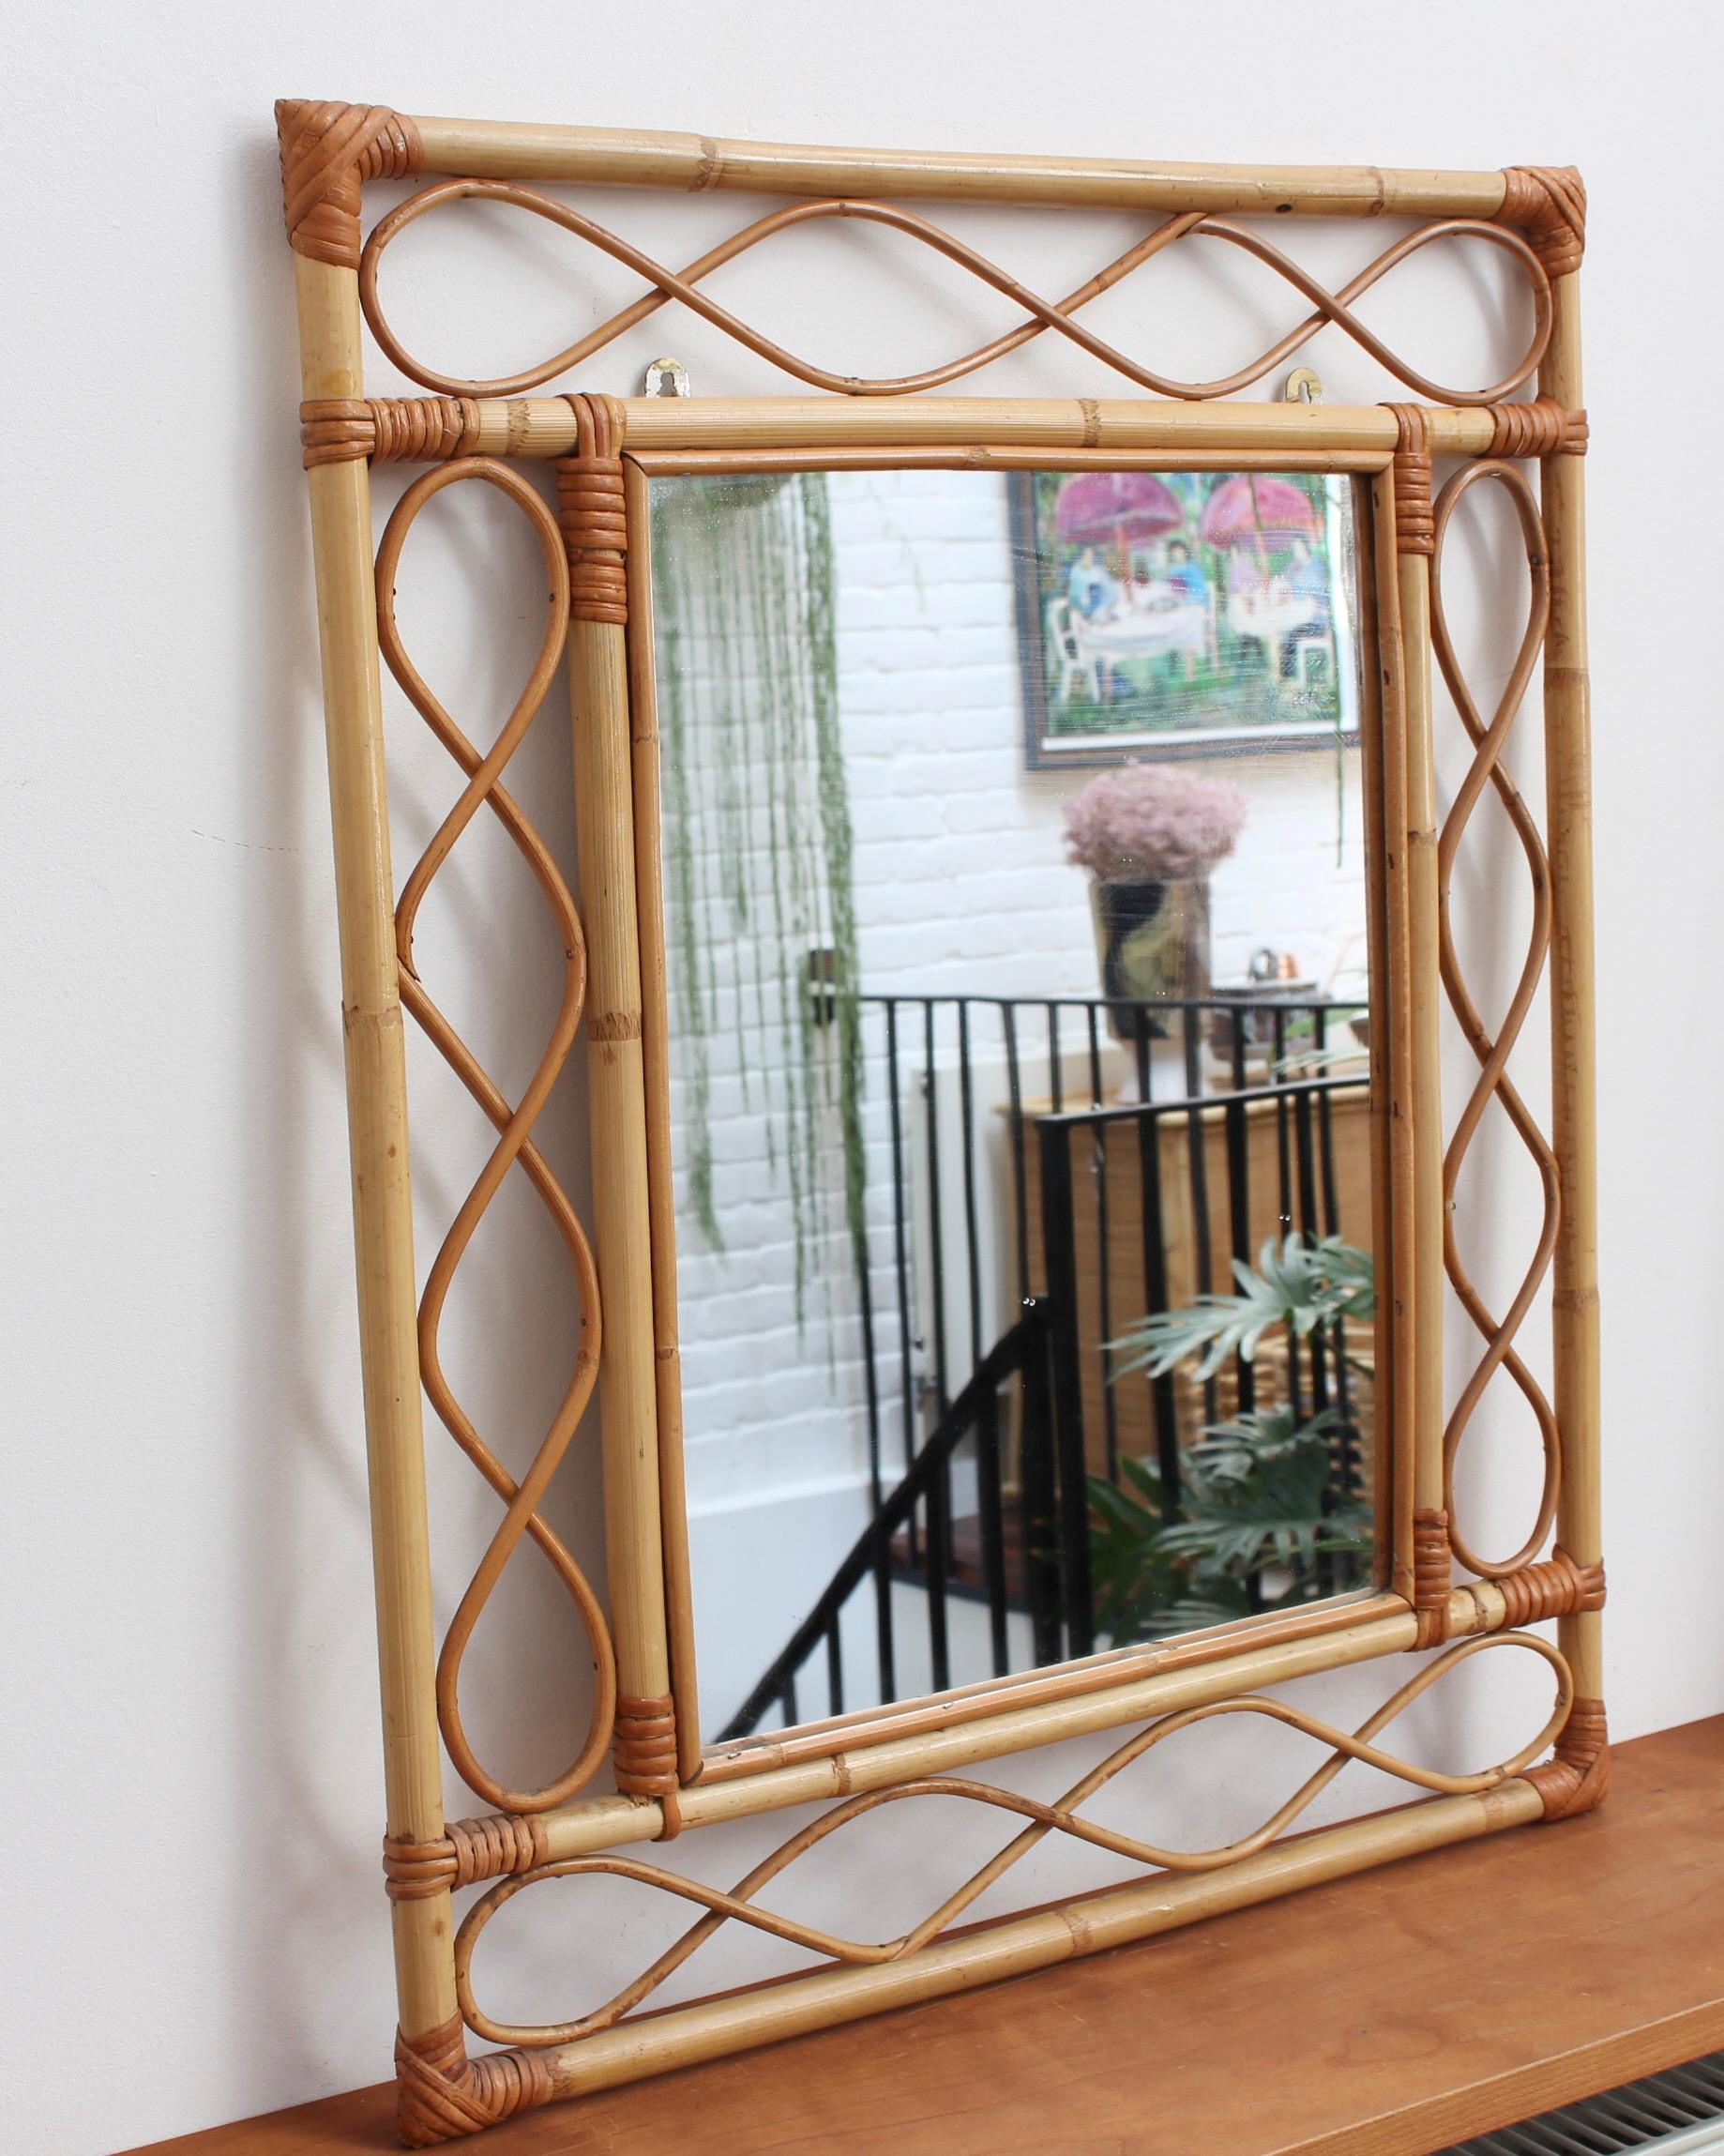 French rattan wall mirror (circa 1960s). This is an Asian-inspired design with inner and outer frames connected by figure-eight shapes of rattan cane. The corners are lashed together and protected with rattan strands. Incredibly stylish, it can add